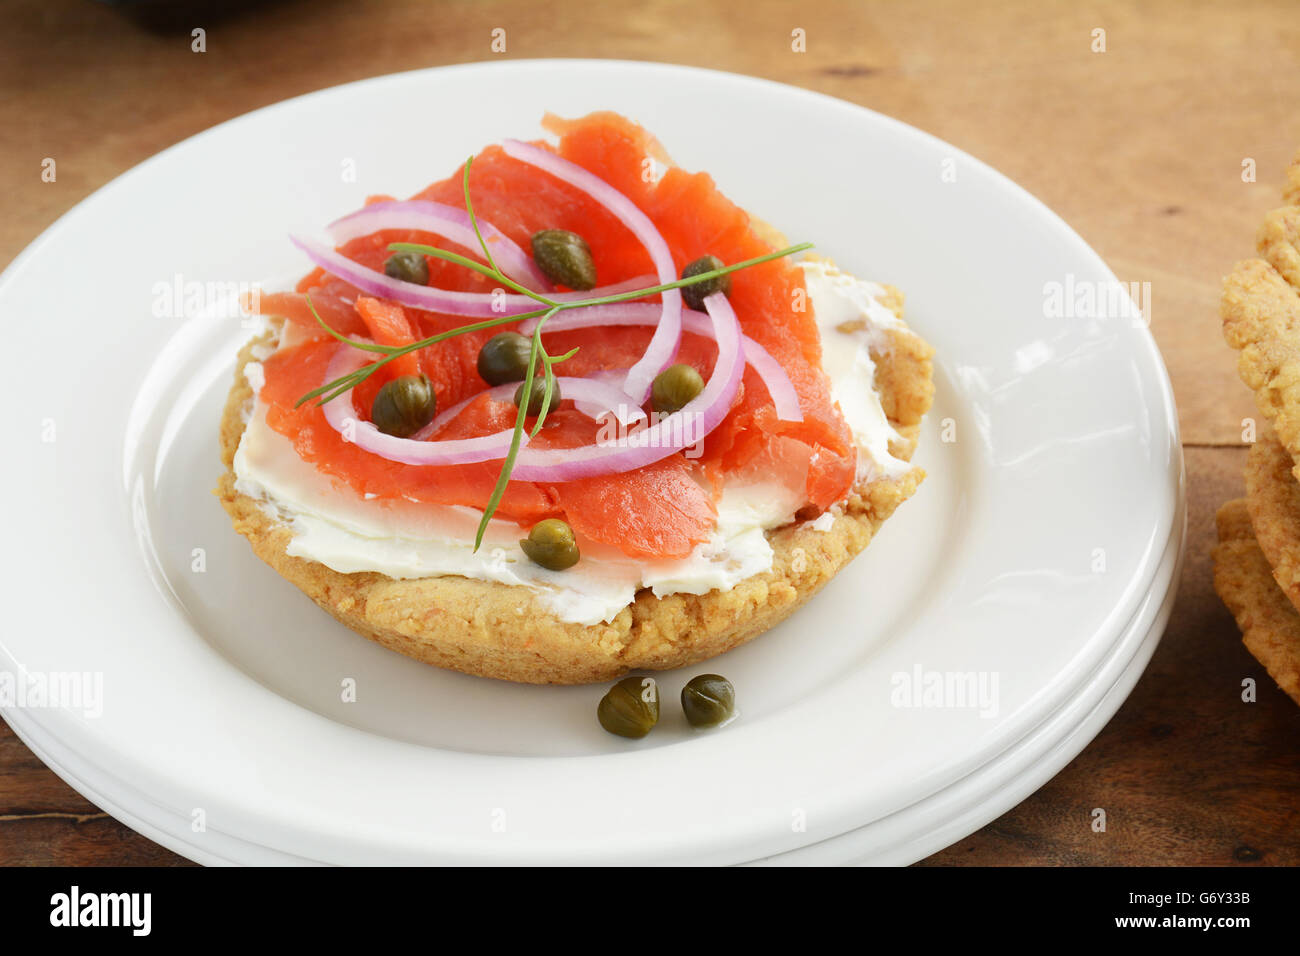 Healthy home made gluten free biscuit with smoked salmon lox, cream cheese, capers and red onion slices on white plate in horizo Stock Photo